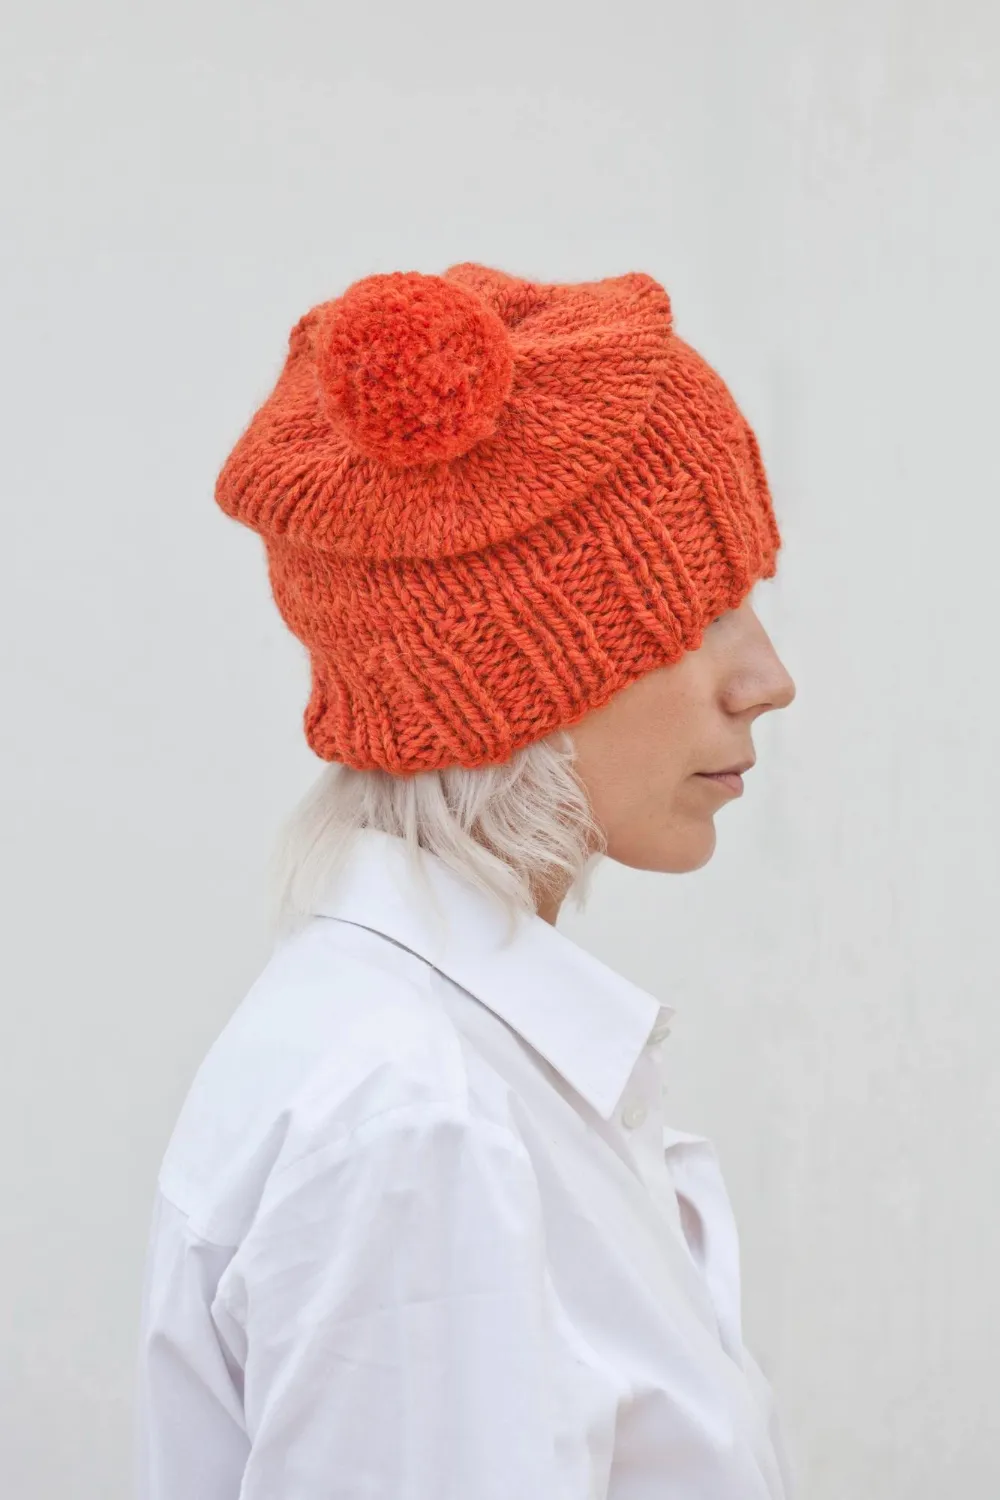 Pretty young woman in warm orange beanie wool knitted hat